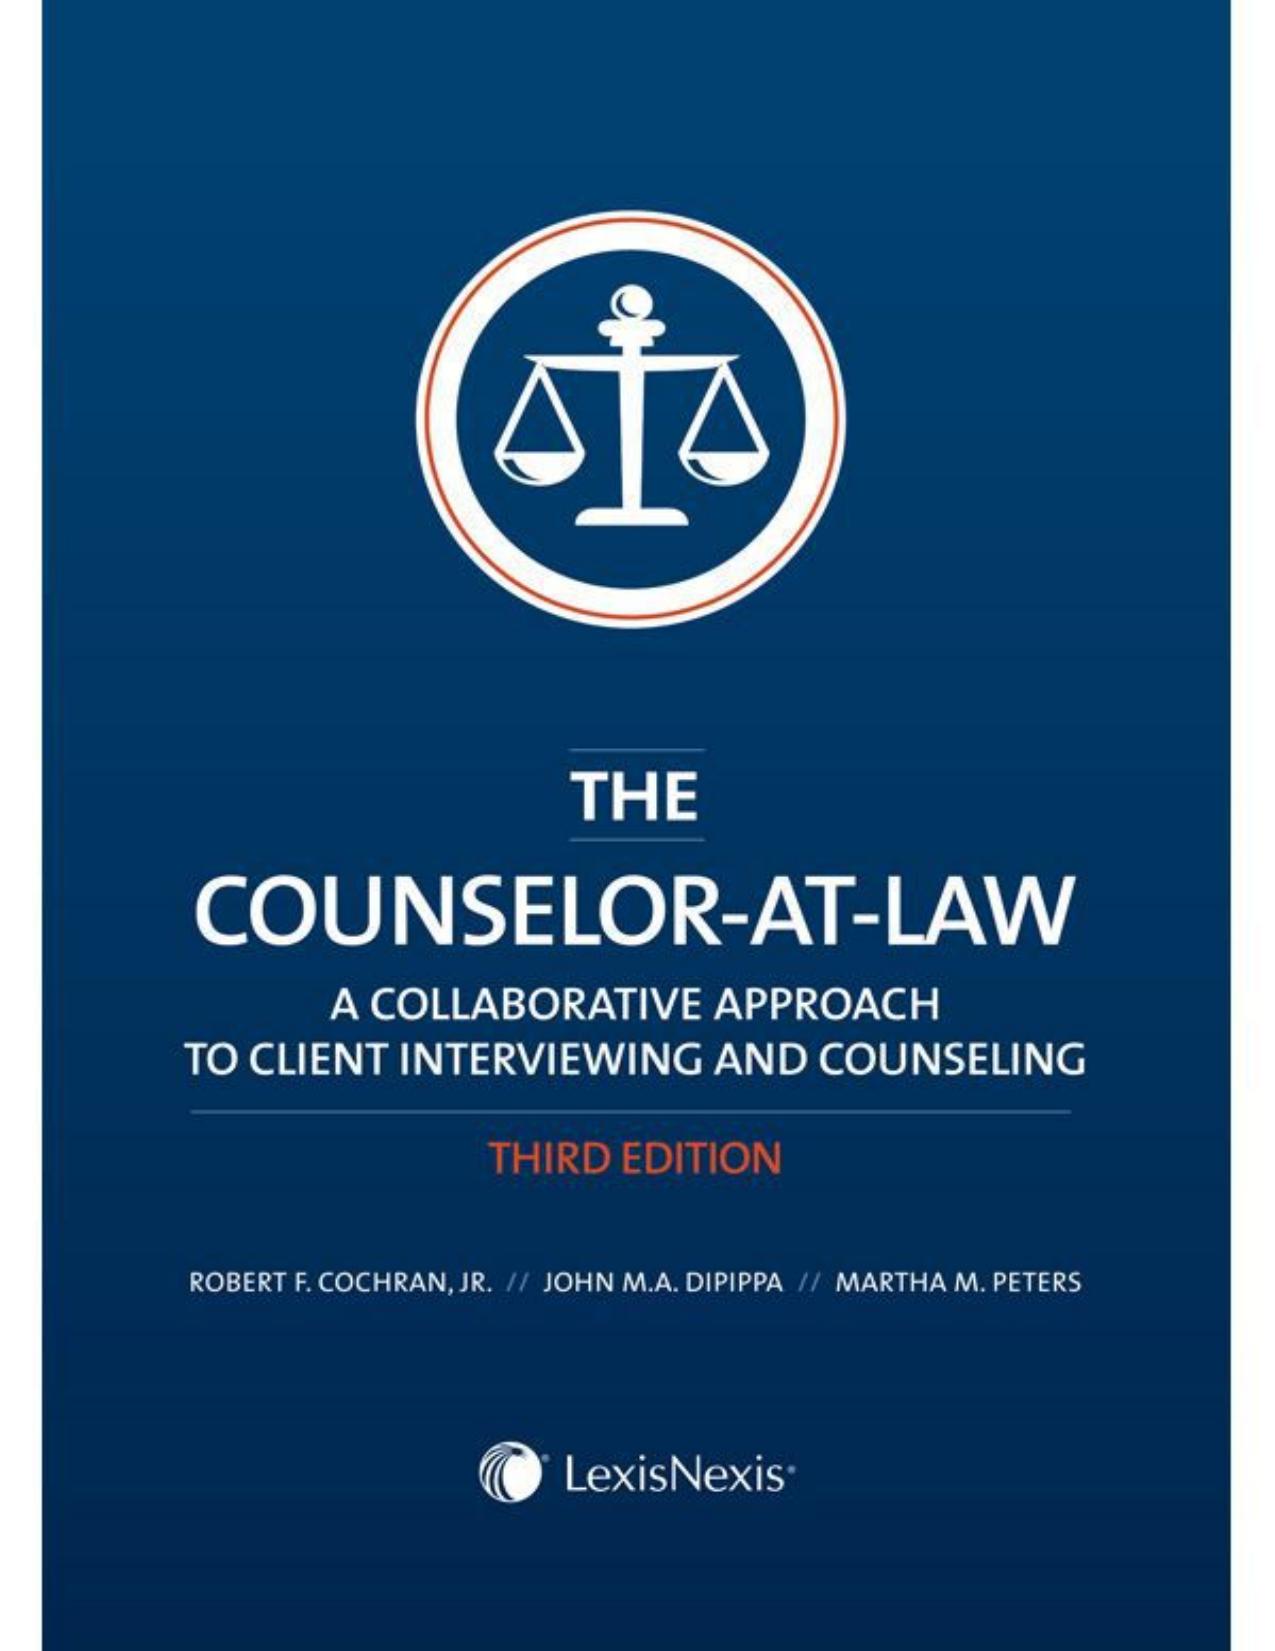 The Counselor-at-Law: A Collaborative Approach to Client Interviewing and Counseling by Robert Cochran John DiPippa Martha Peters